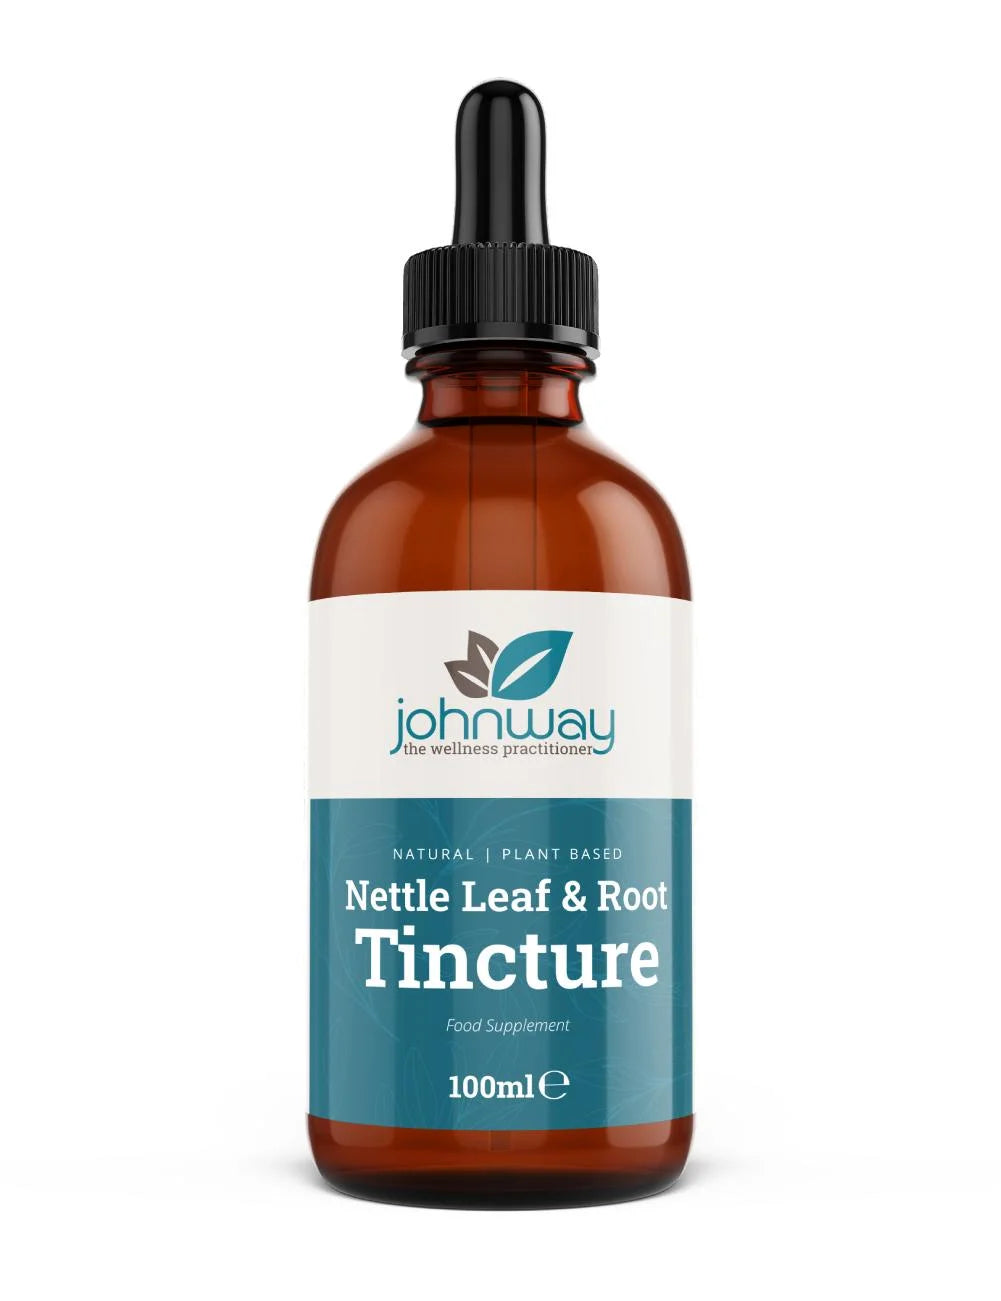 NETTLE LEAF & ROOT TINCTURE